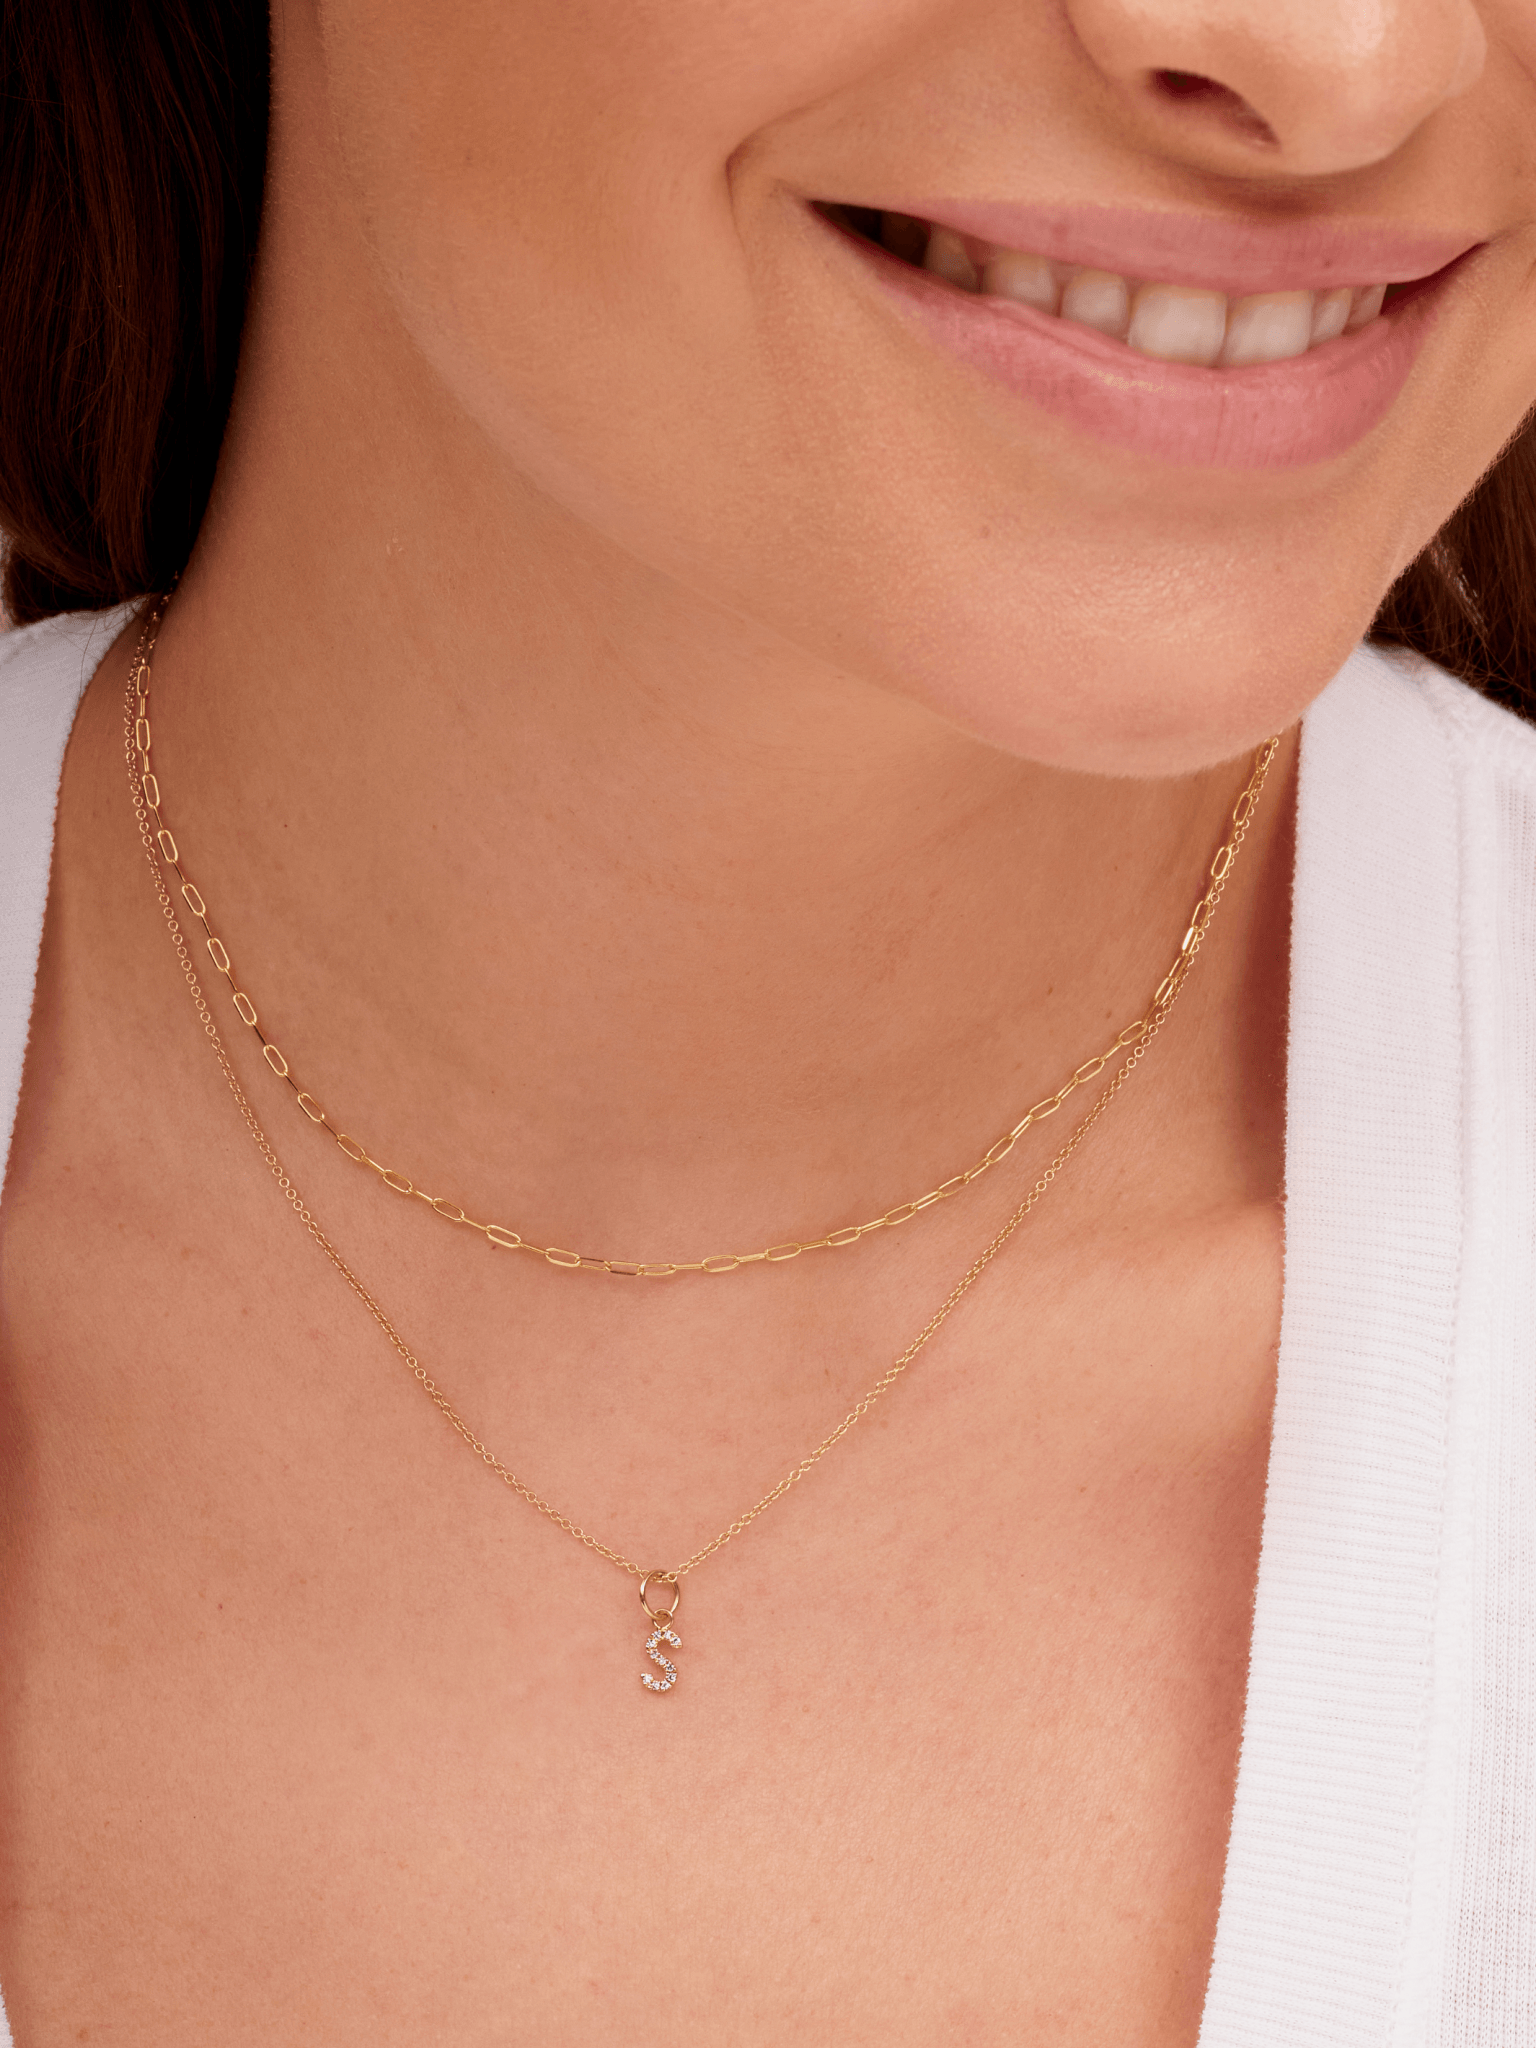 14K Gold Ball Chain Necklace, 3mm Size ~ in Stock! 14K Yellow Gold / 16 Total Chain Length